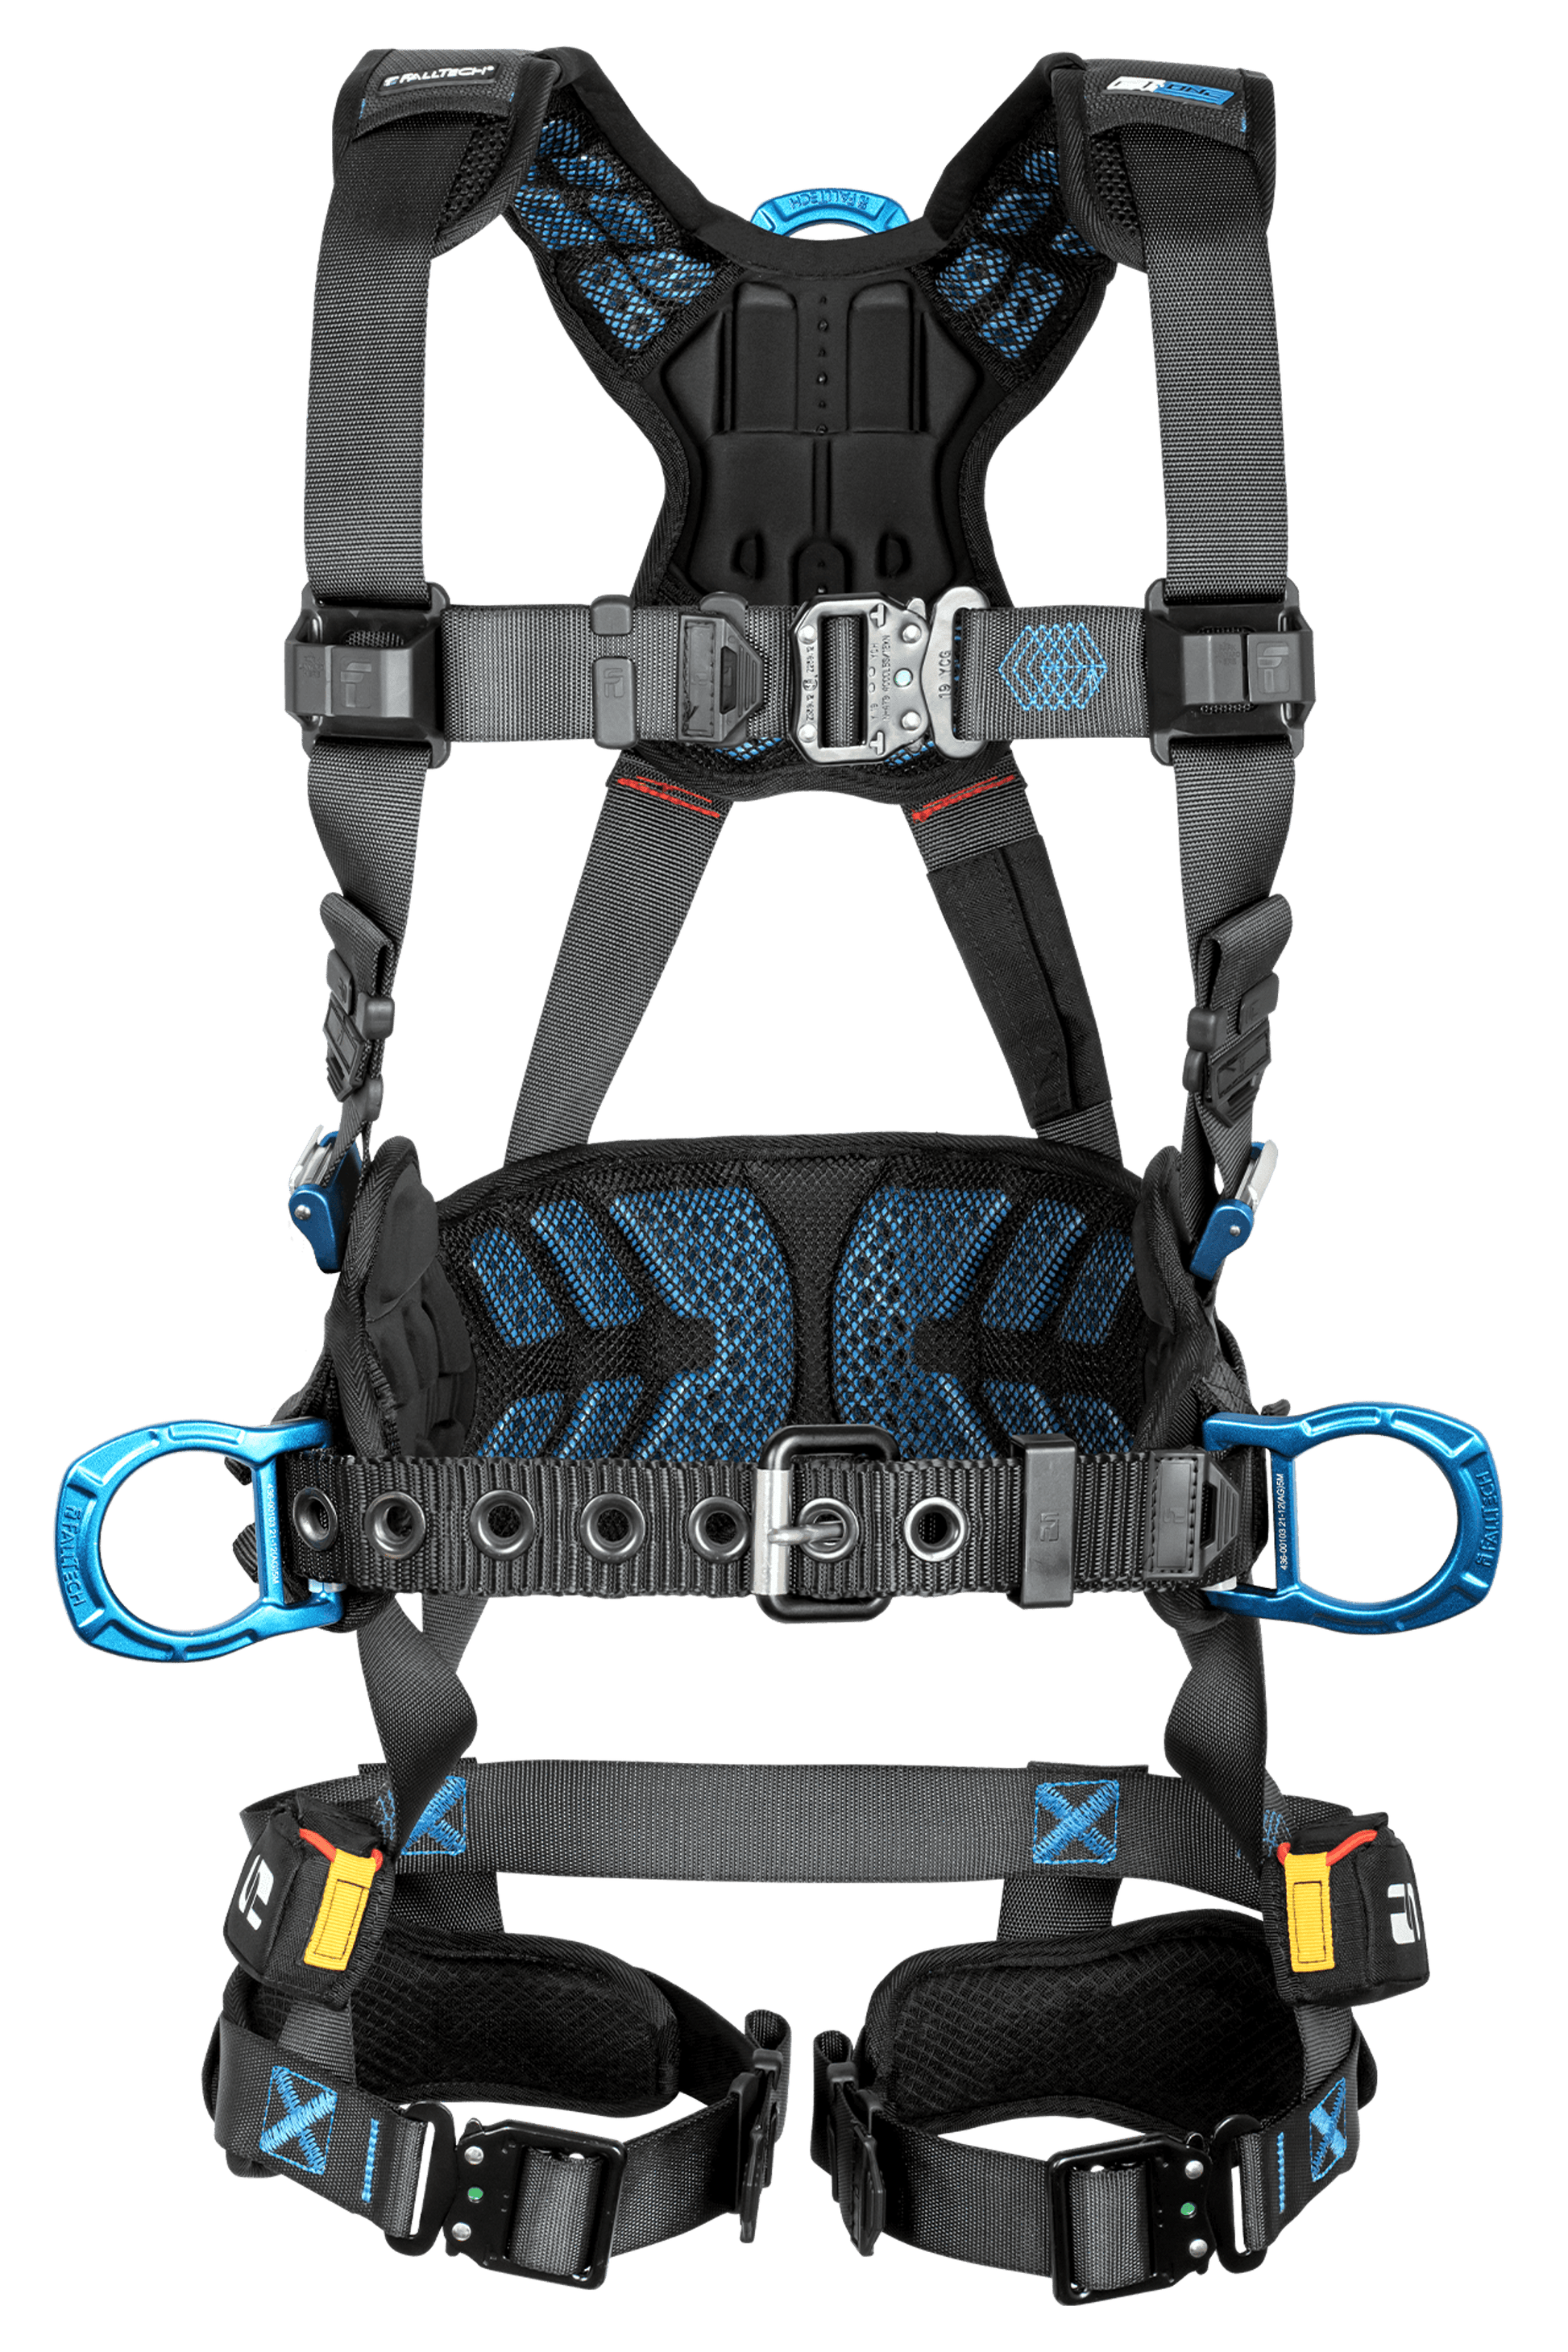 FT-One Full Body Safety Harness With Tool Belt, Tongue Buckle Leg Adjustments Medium